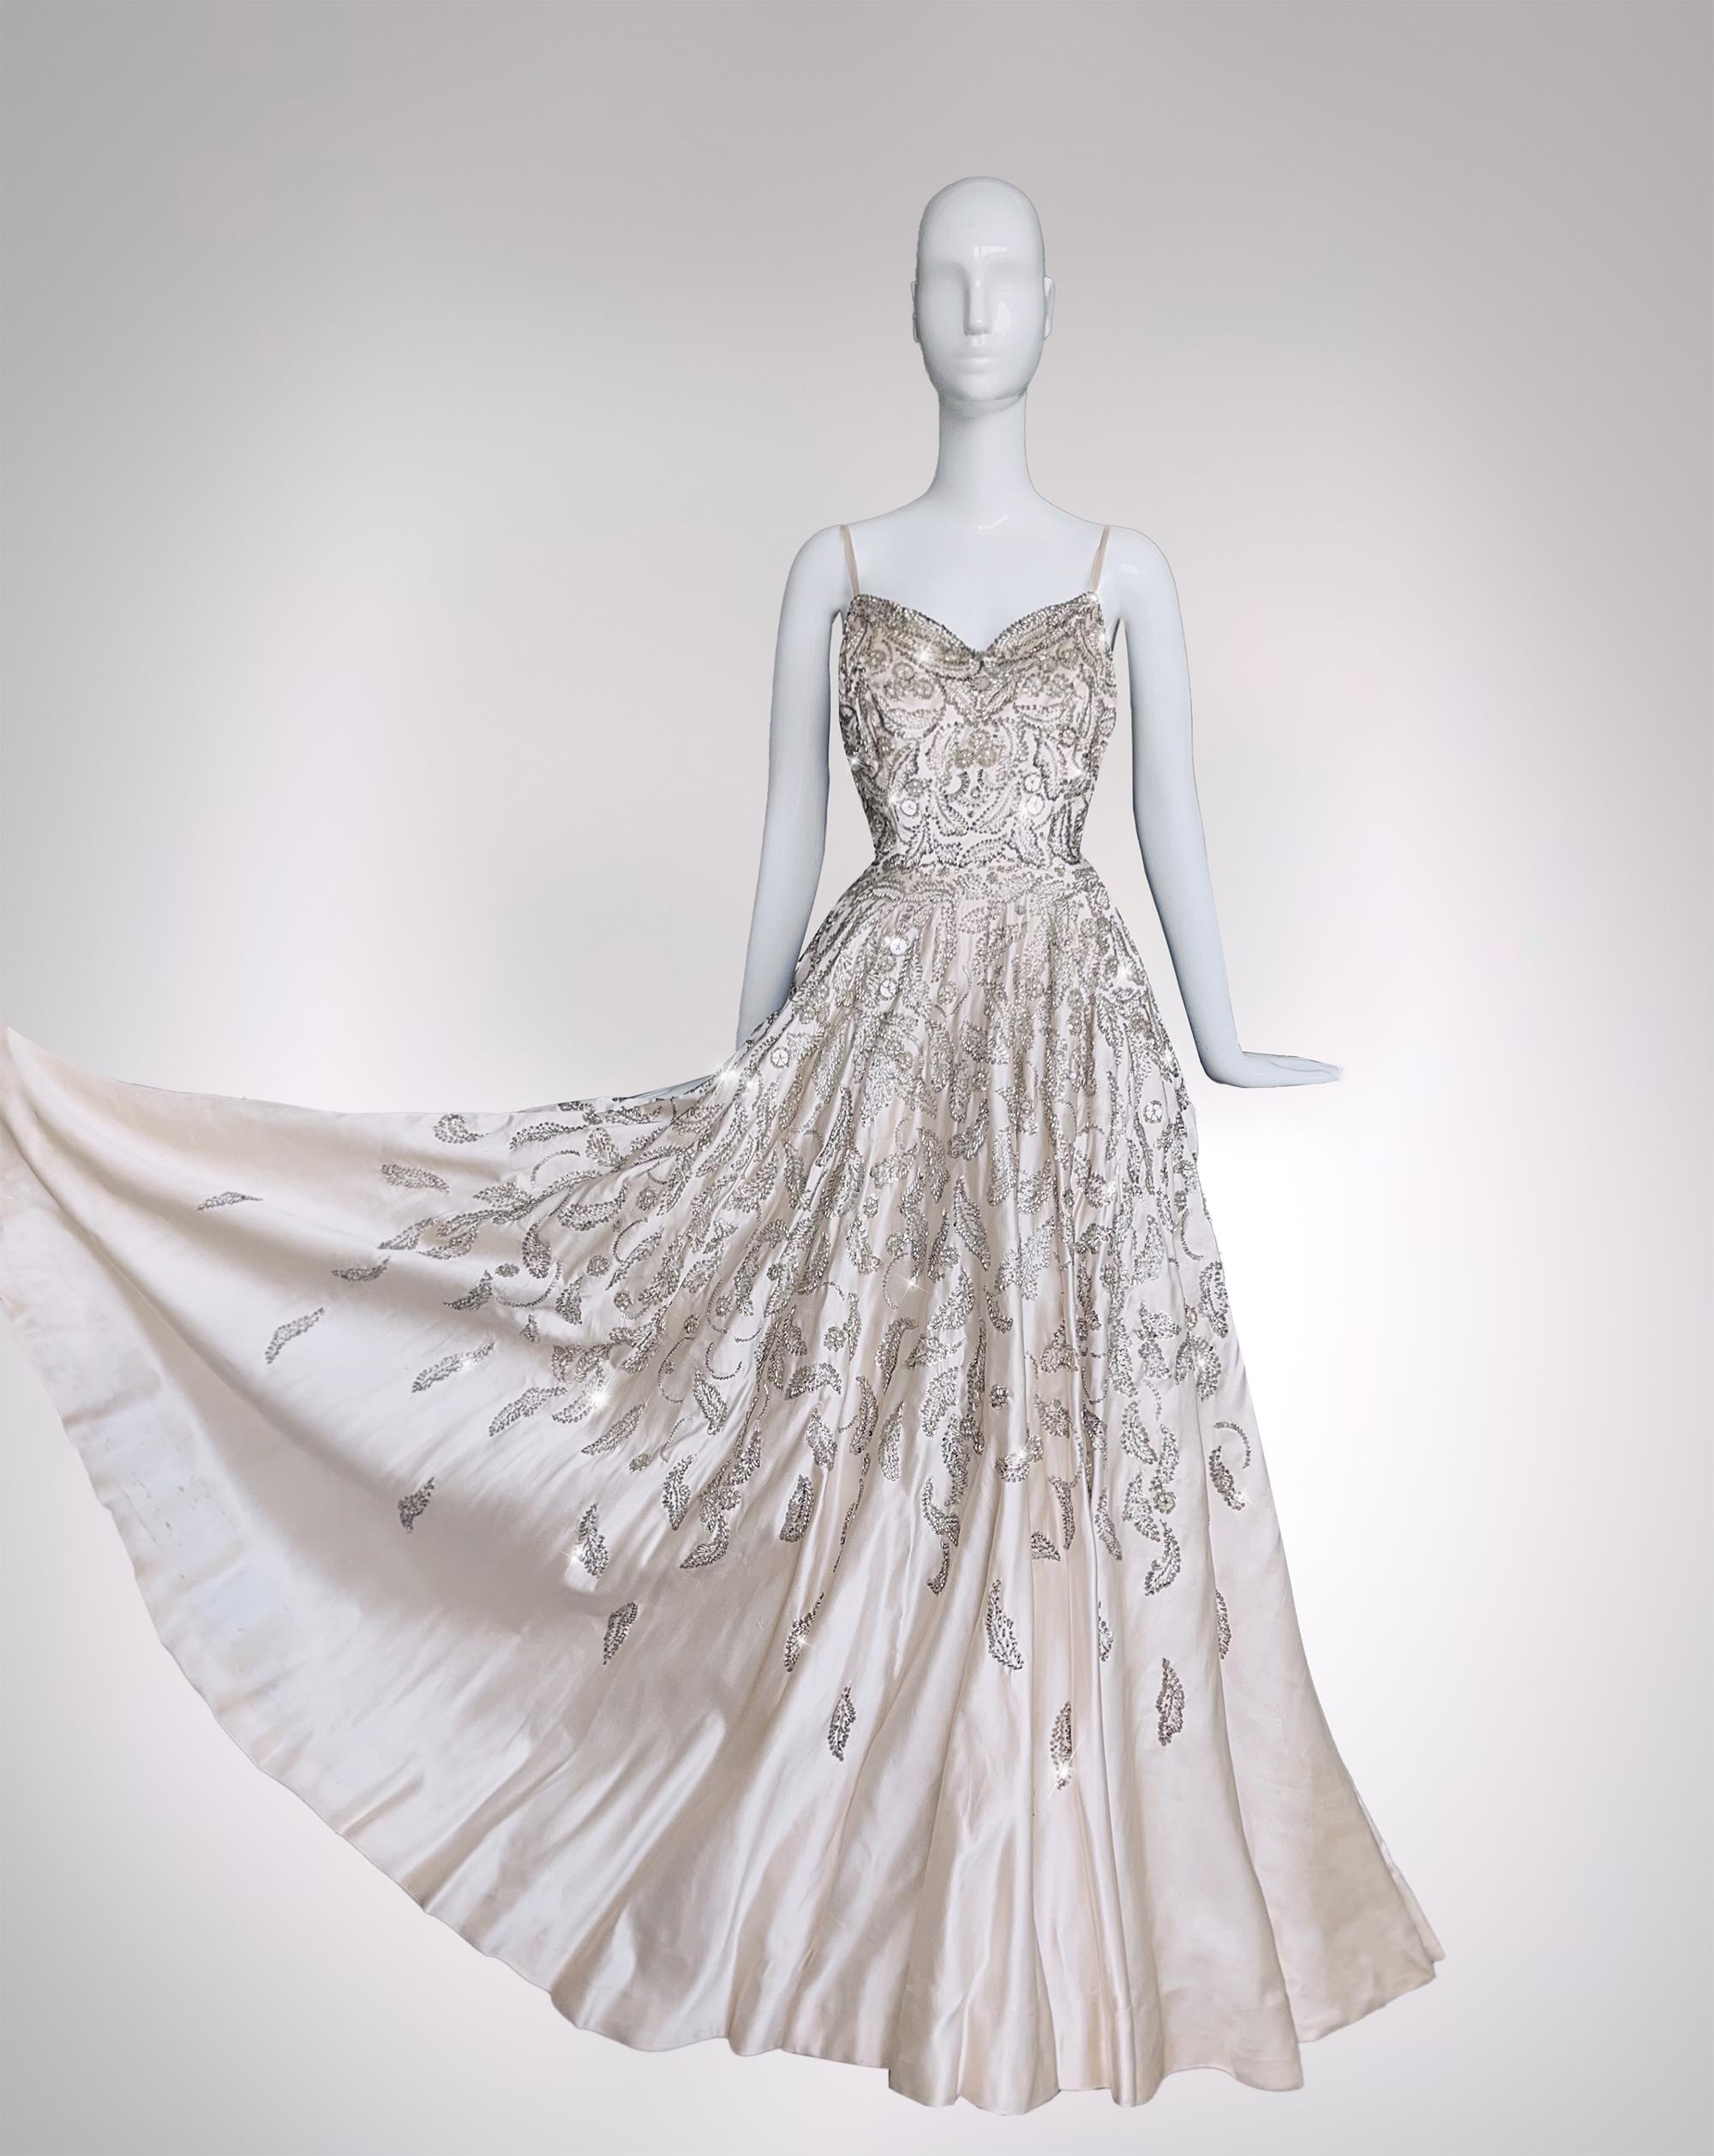 Pierre Balmain Couture Ballgown  1955 Iconic Dress For Sale 3